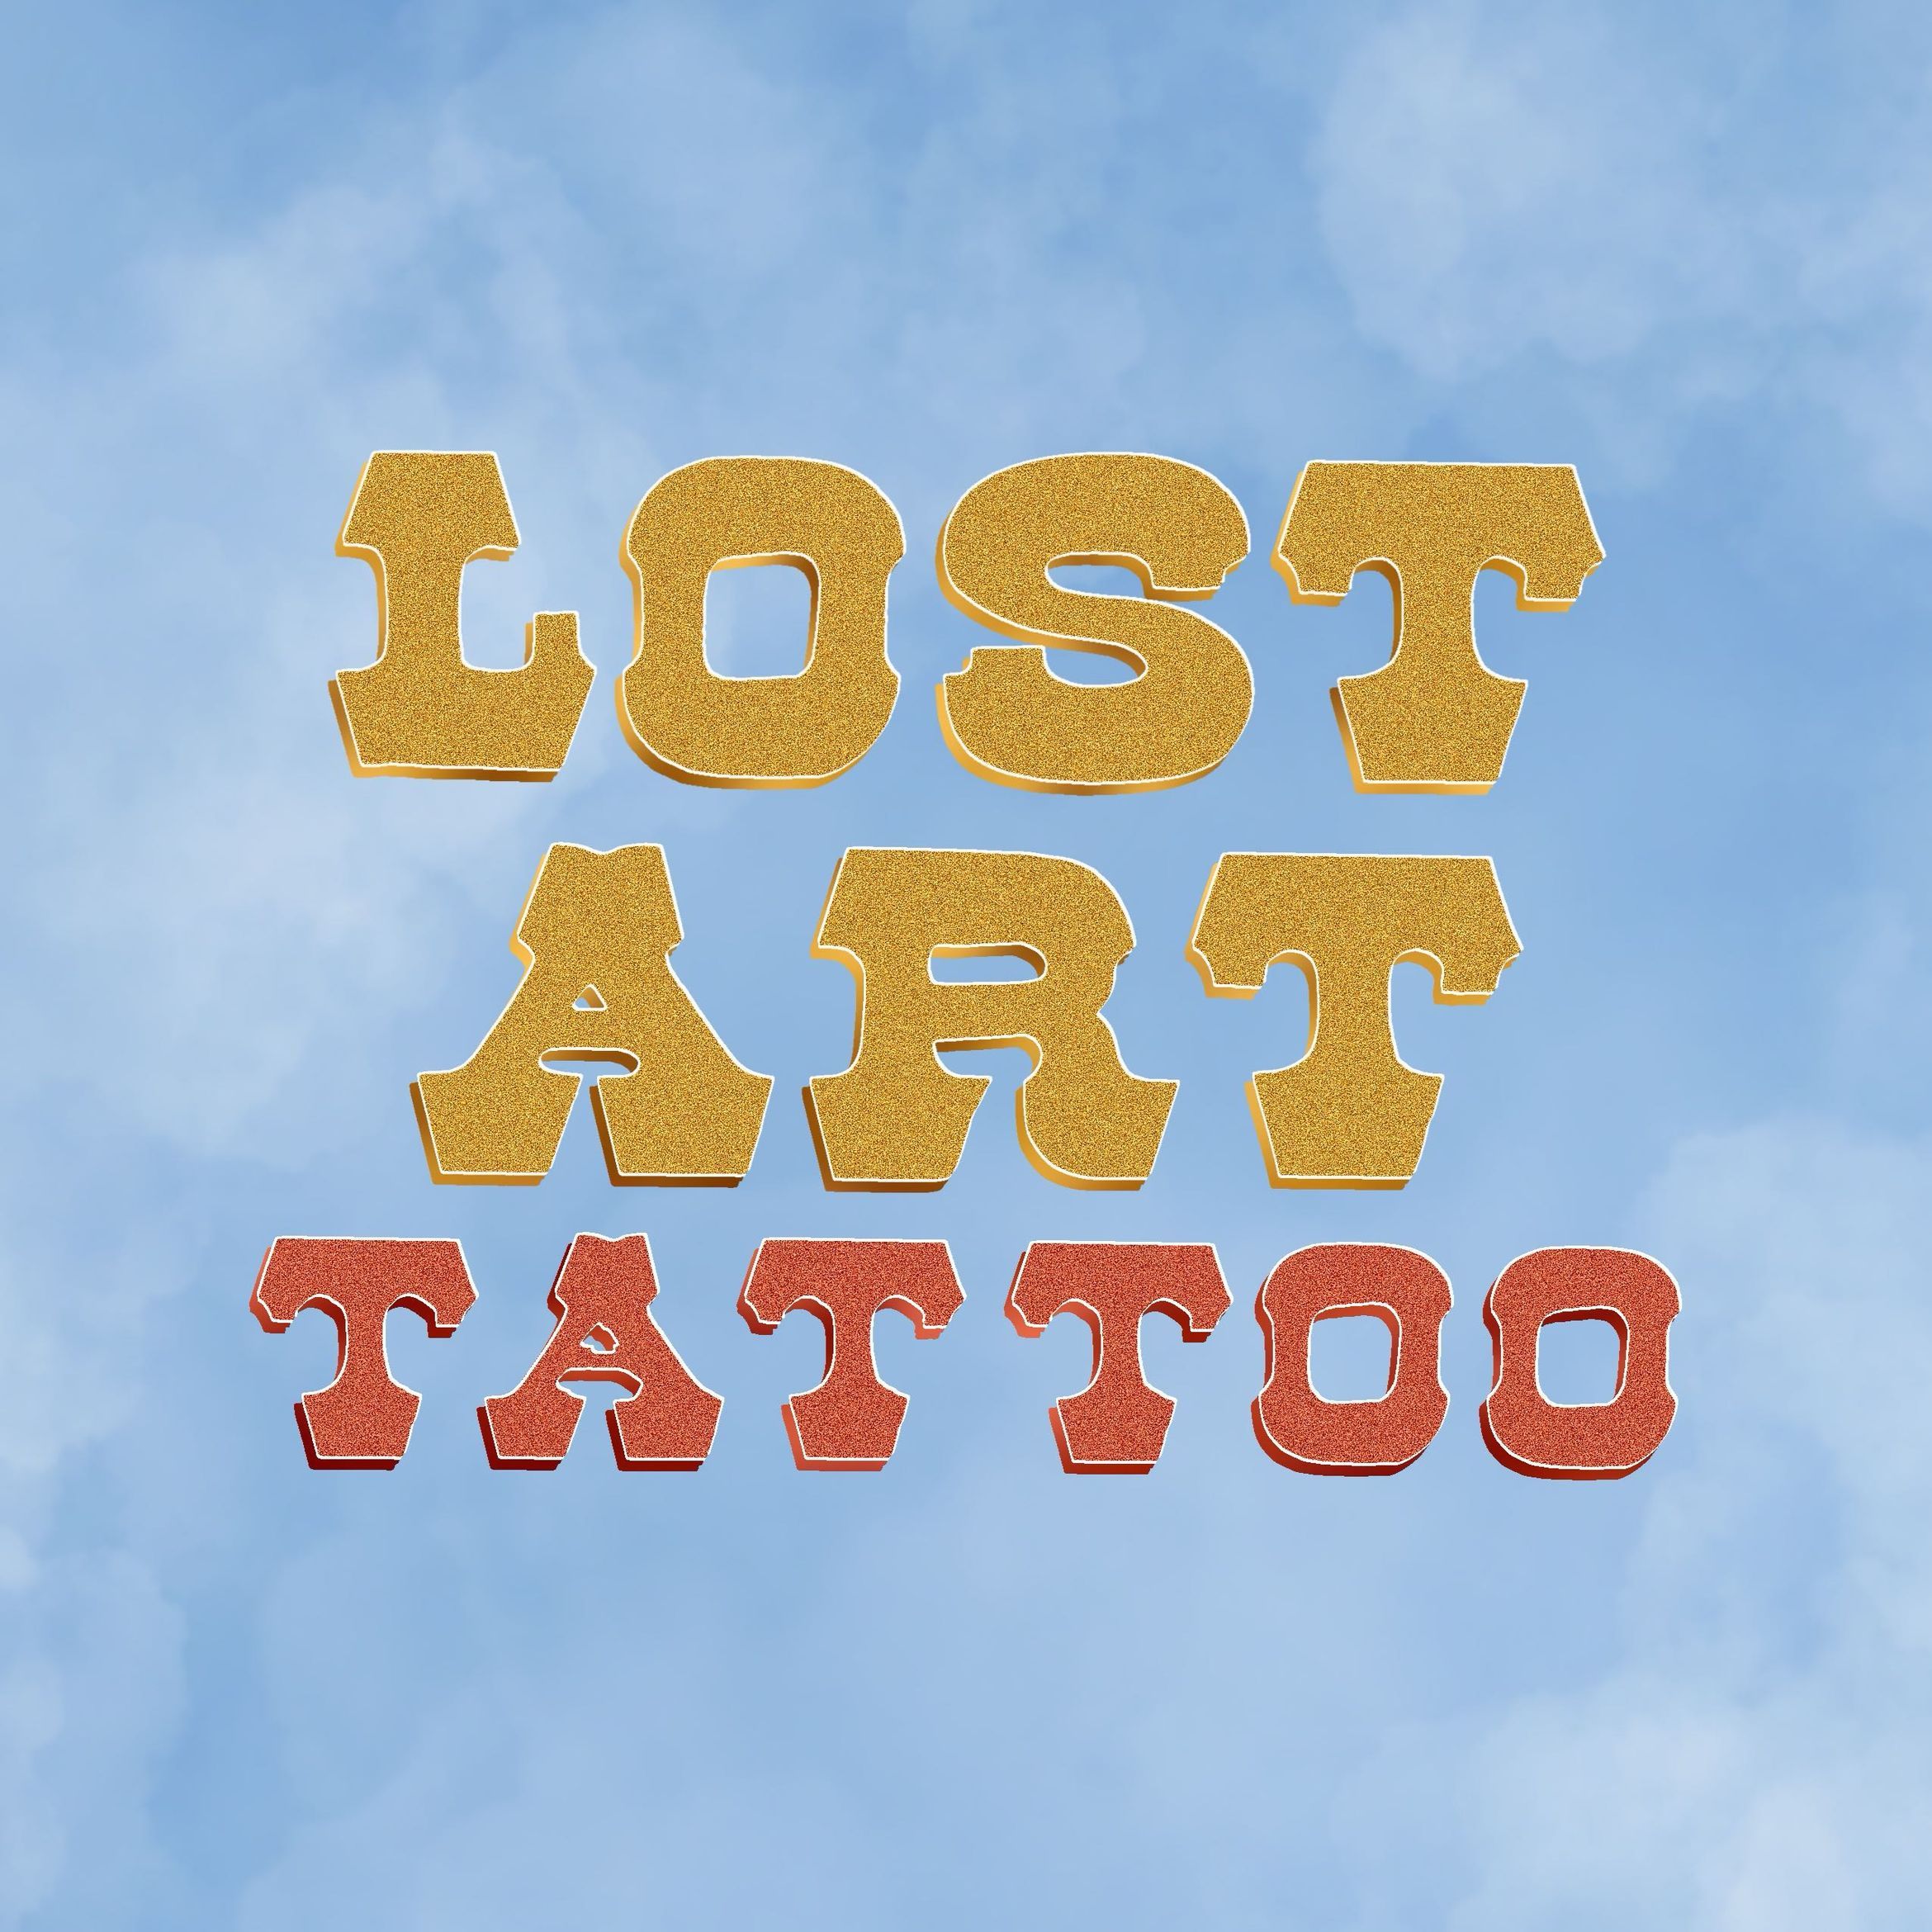 Lost Art Tattoo, 2639 Lincoln Ave, Ogden, 84401